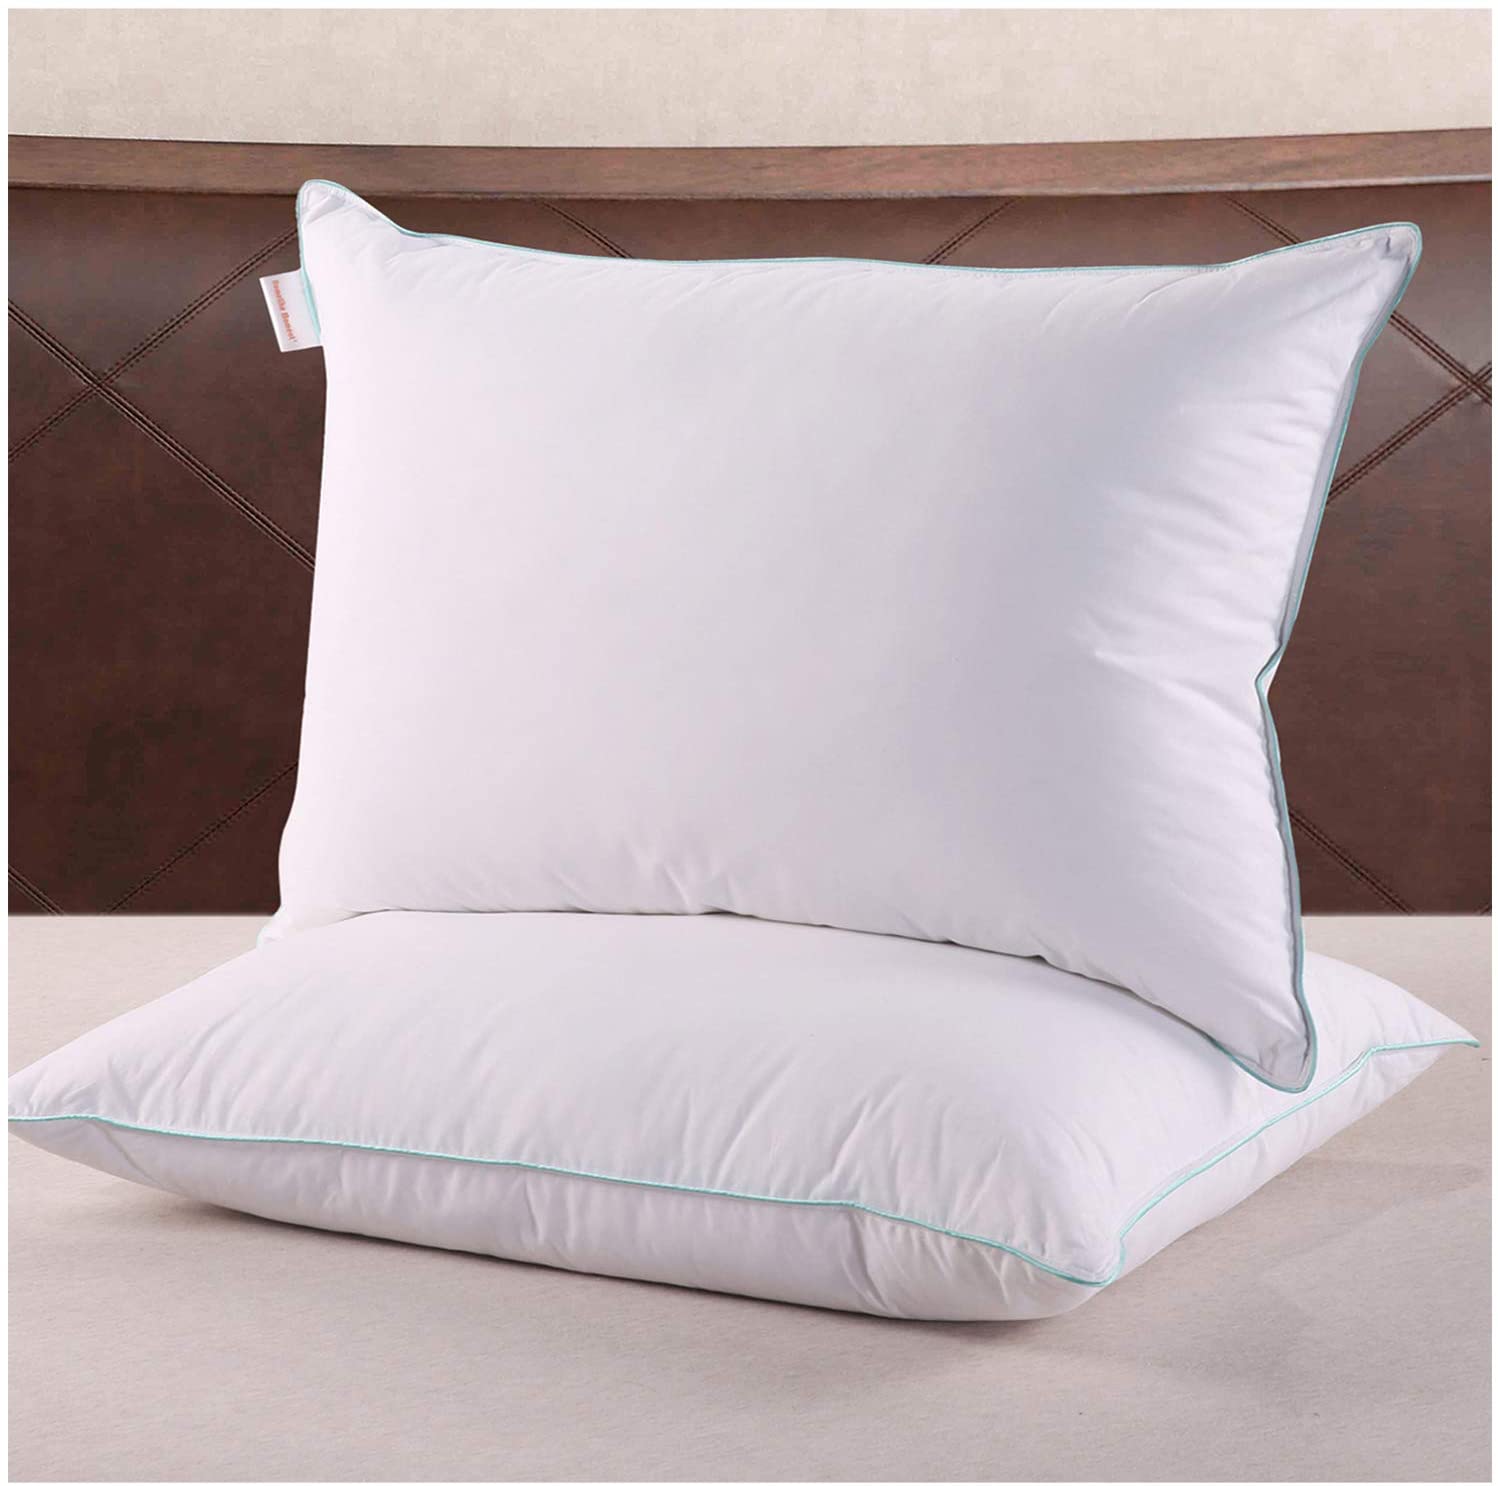 Goose Down White Pillow Inserts 1200gram Bed Sleeping Hotel